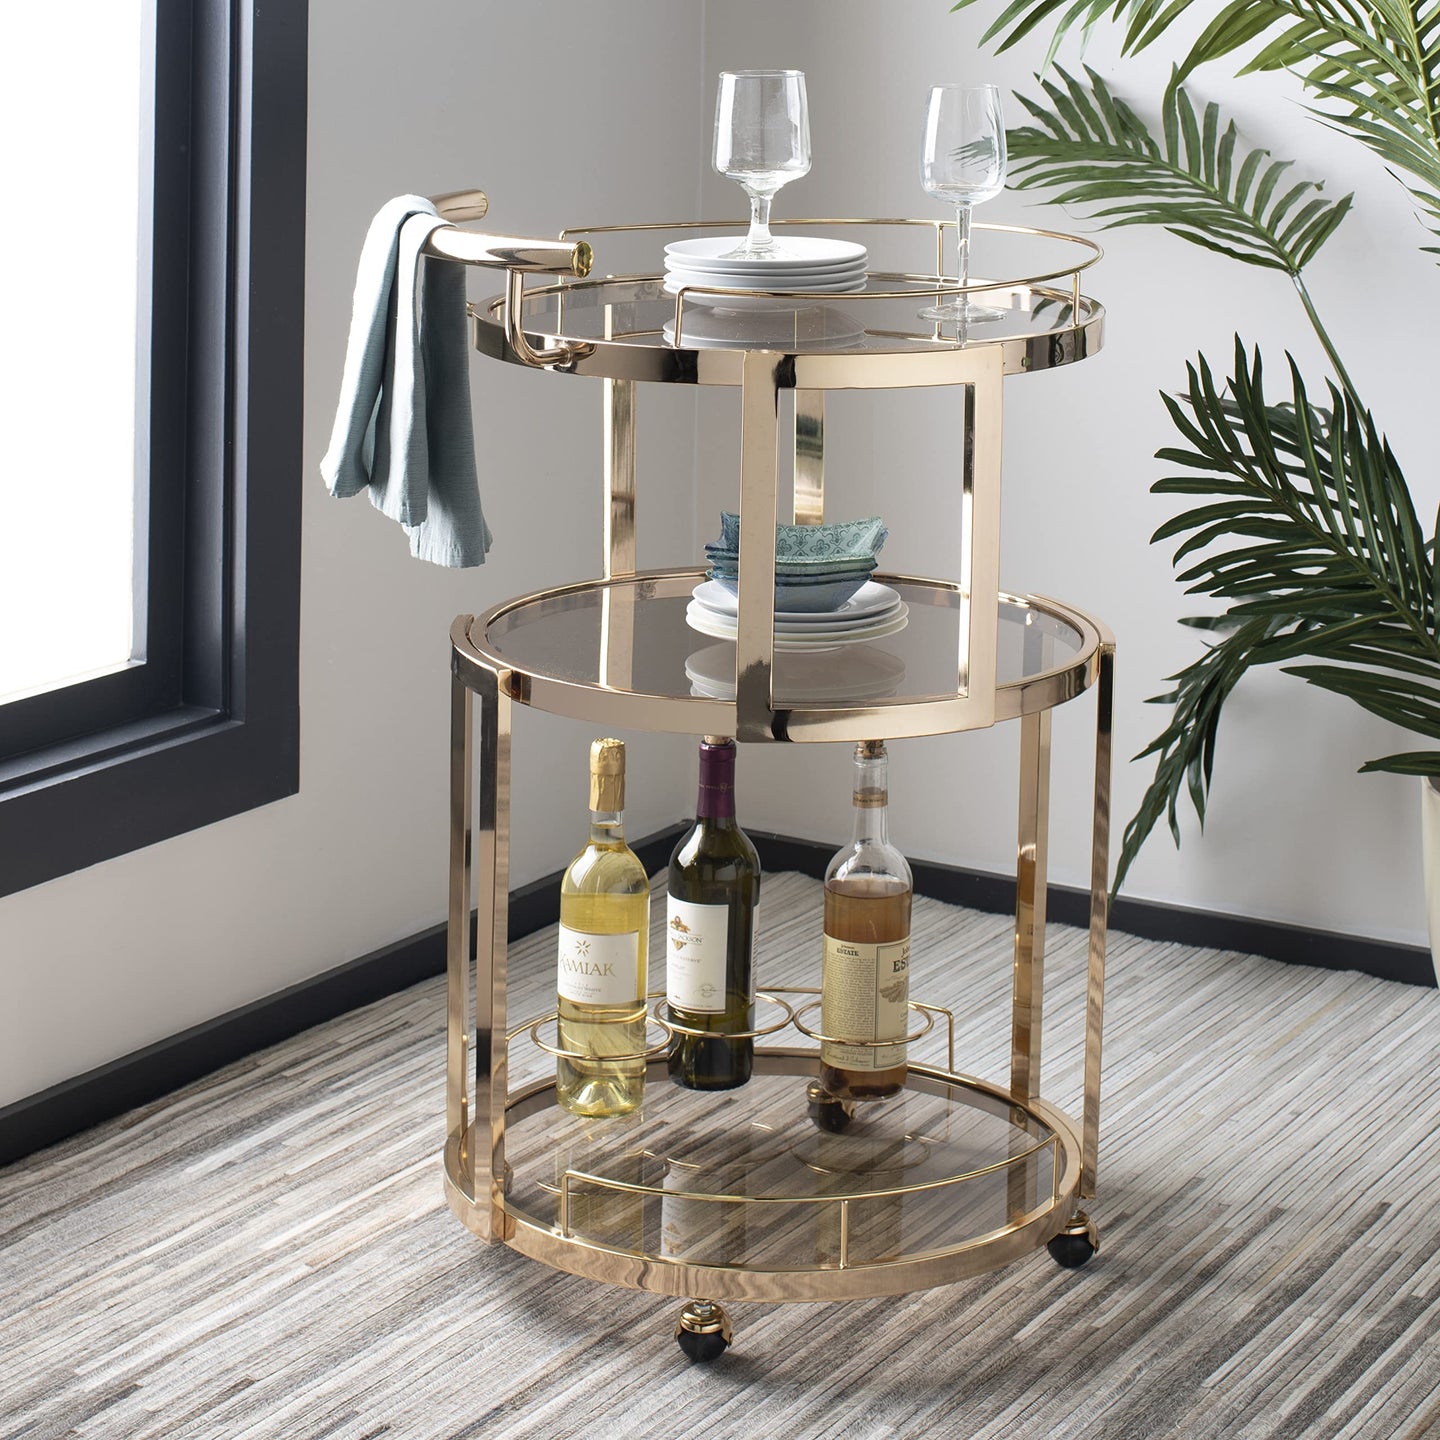 Safavieh Home Collection Rio Gold and Tea Colored Glass 3-Tier Round Bar Cart and Wine Rack